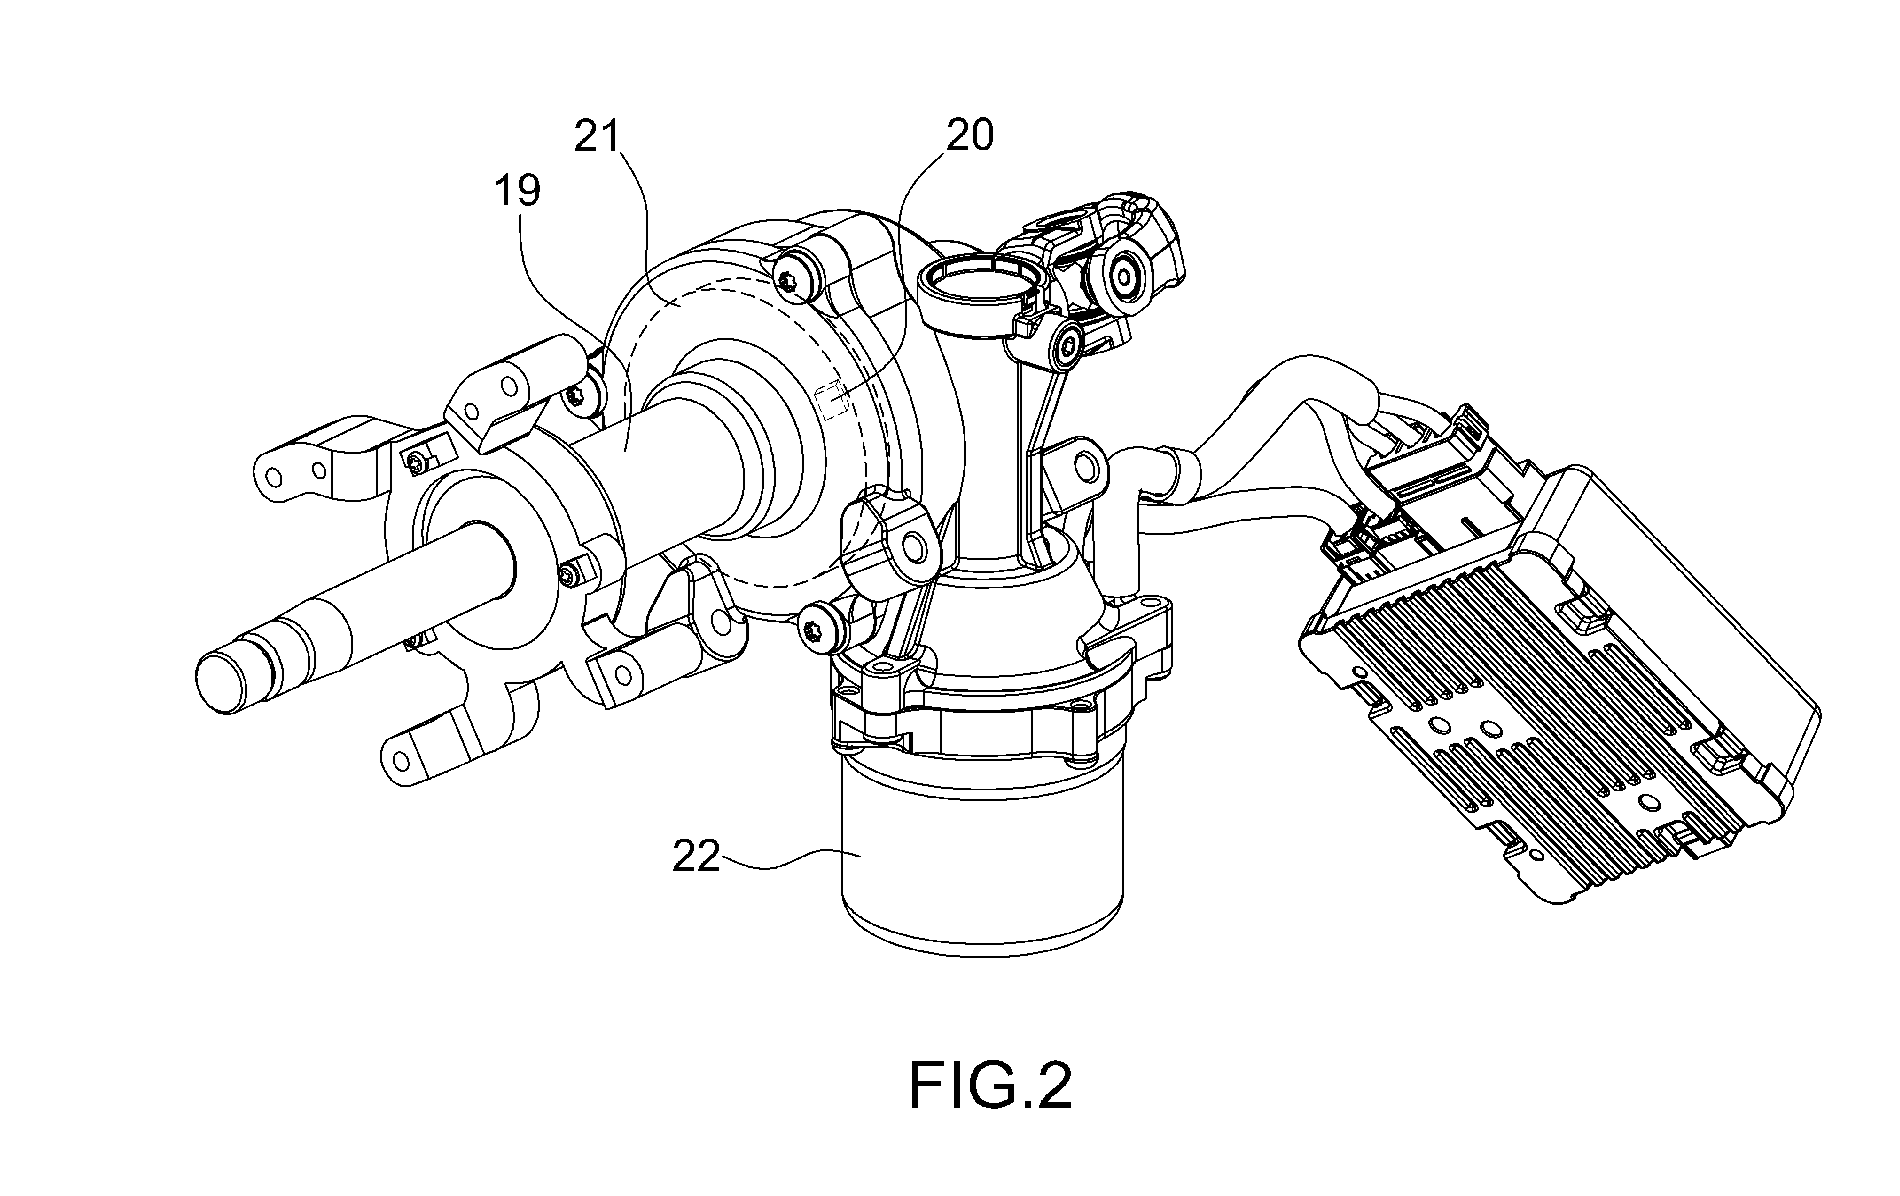 Steering apparatus for hev and method of controlling the same